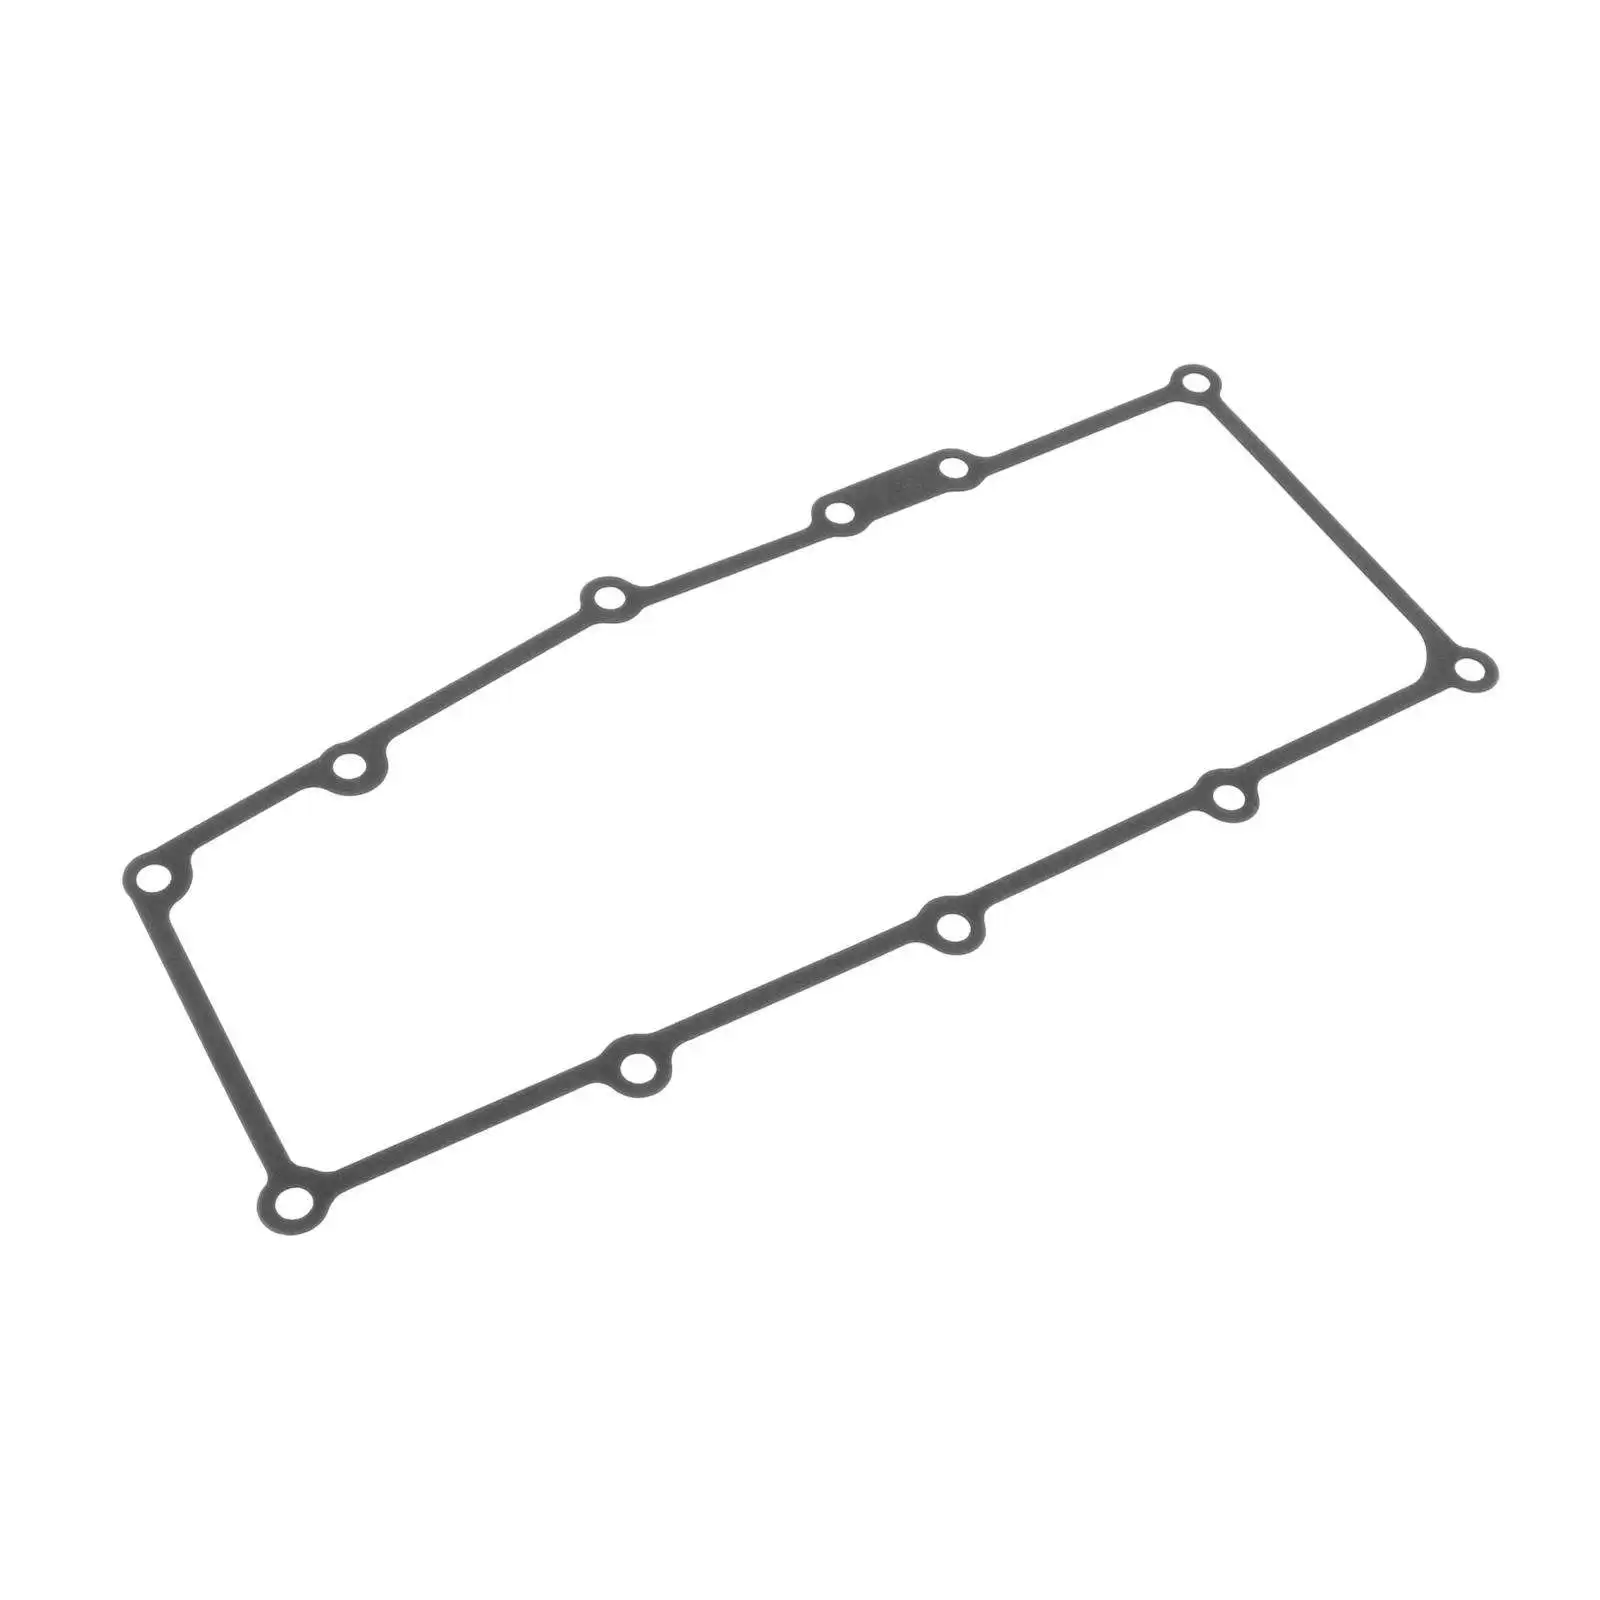 Crankcase Water Intake Gasket Fits for Yamaha Boat VX 6BH-13557-00 Replacement Parts Accessories